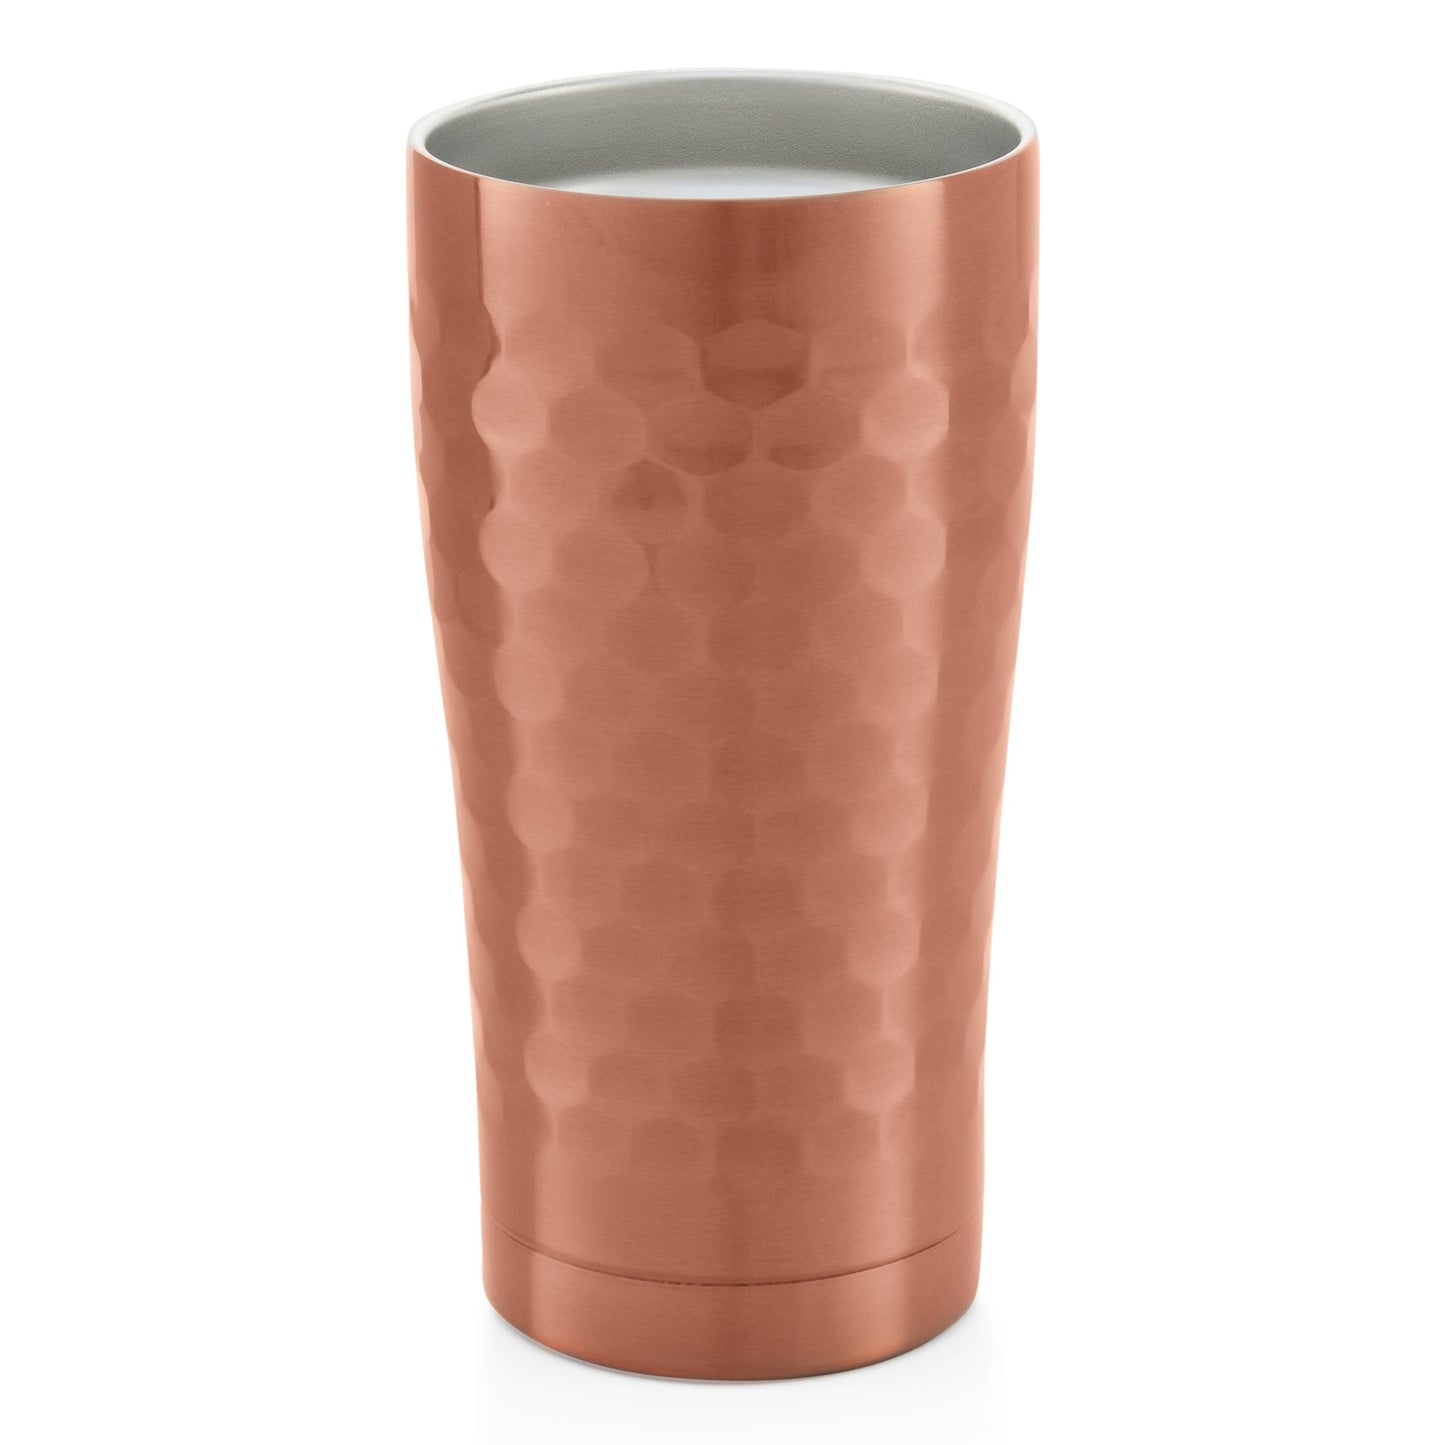 Sic Lifestyle - 20 oz Hammered Copper SIC Stainless Steel Tumbler